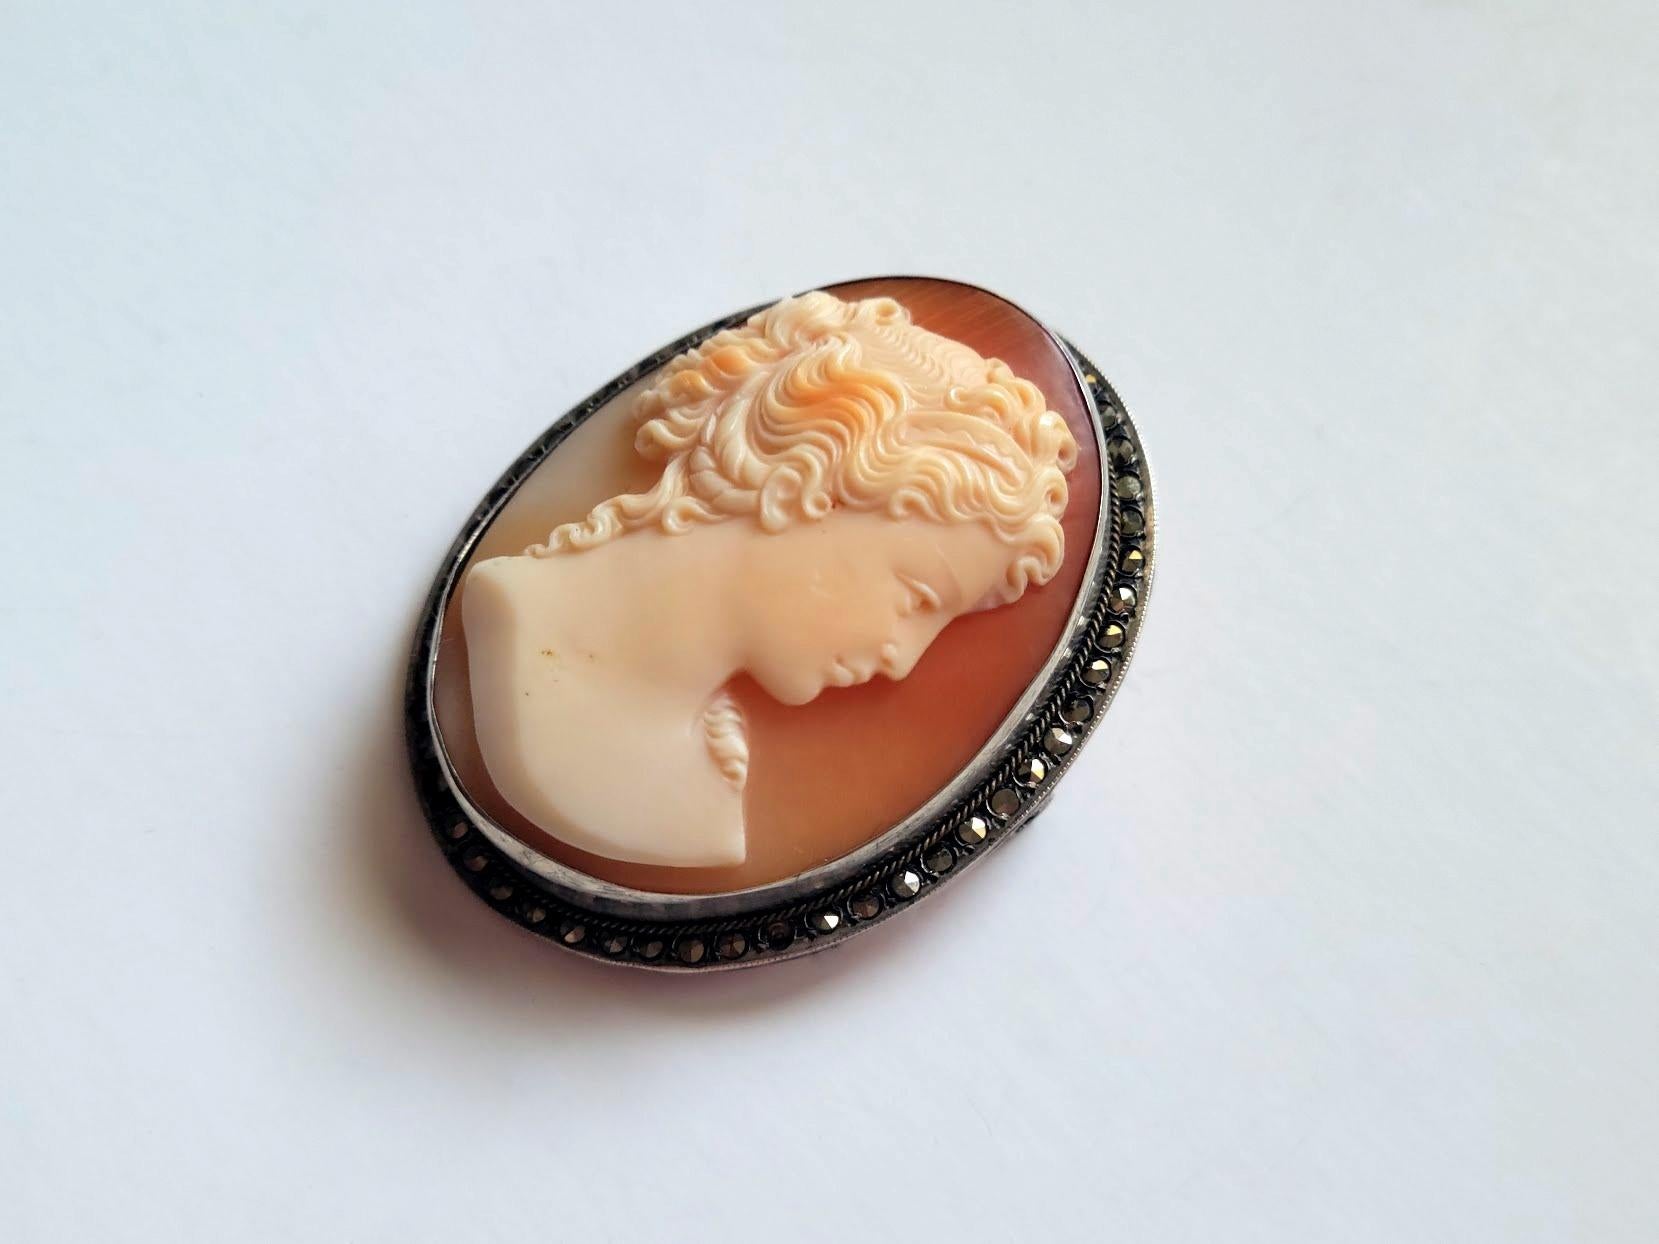 Art Deco Cameo Brooch. Fabulously carved cameo brooch made at the beginning of the 20th century, during the Art Deco era (1920-1940). It depicts a beautiful portrait of a young lady. The execution of the shell is amazing, and the relief helps to add